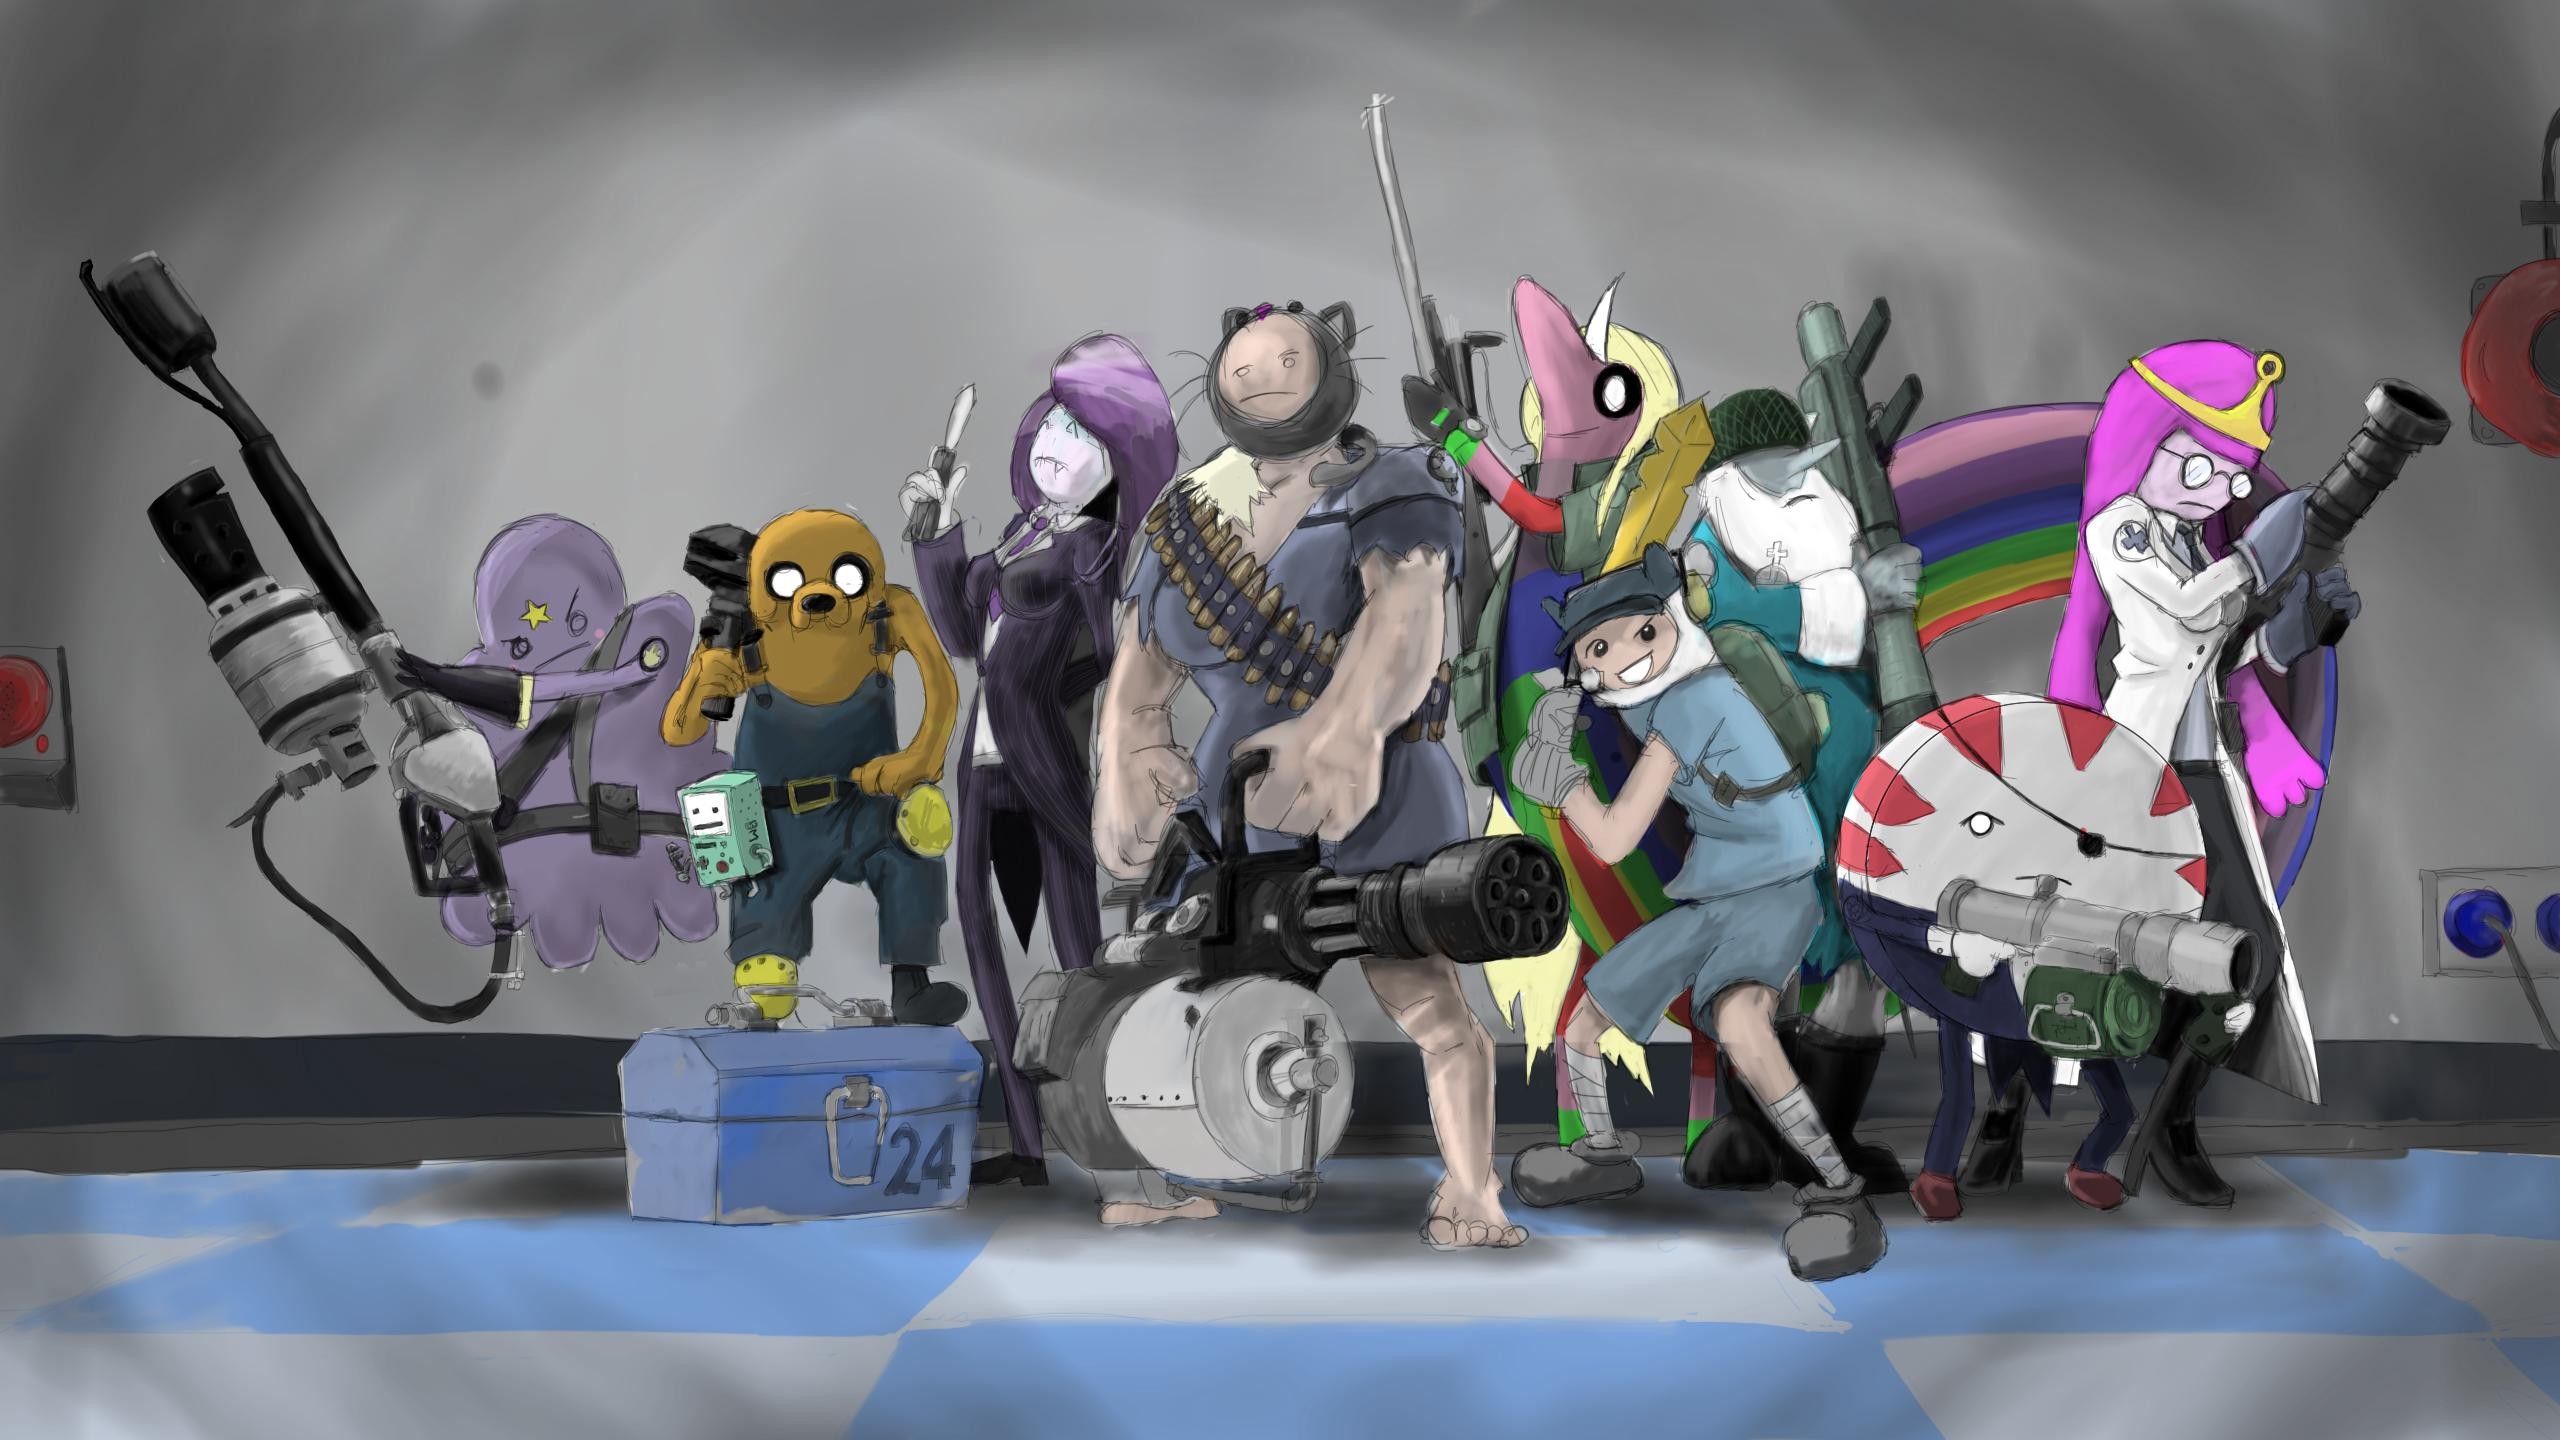 2560x1440 Adventure Time/Team Fortress 2 Crossover